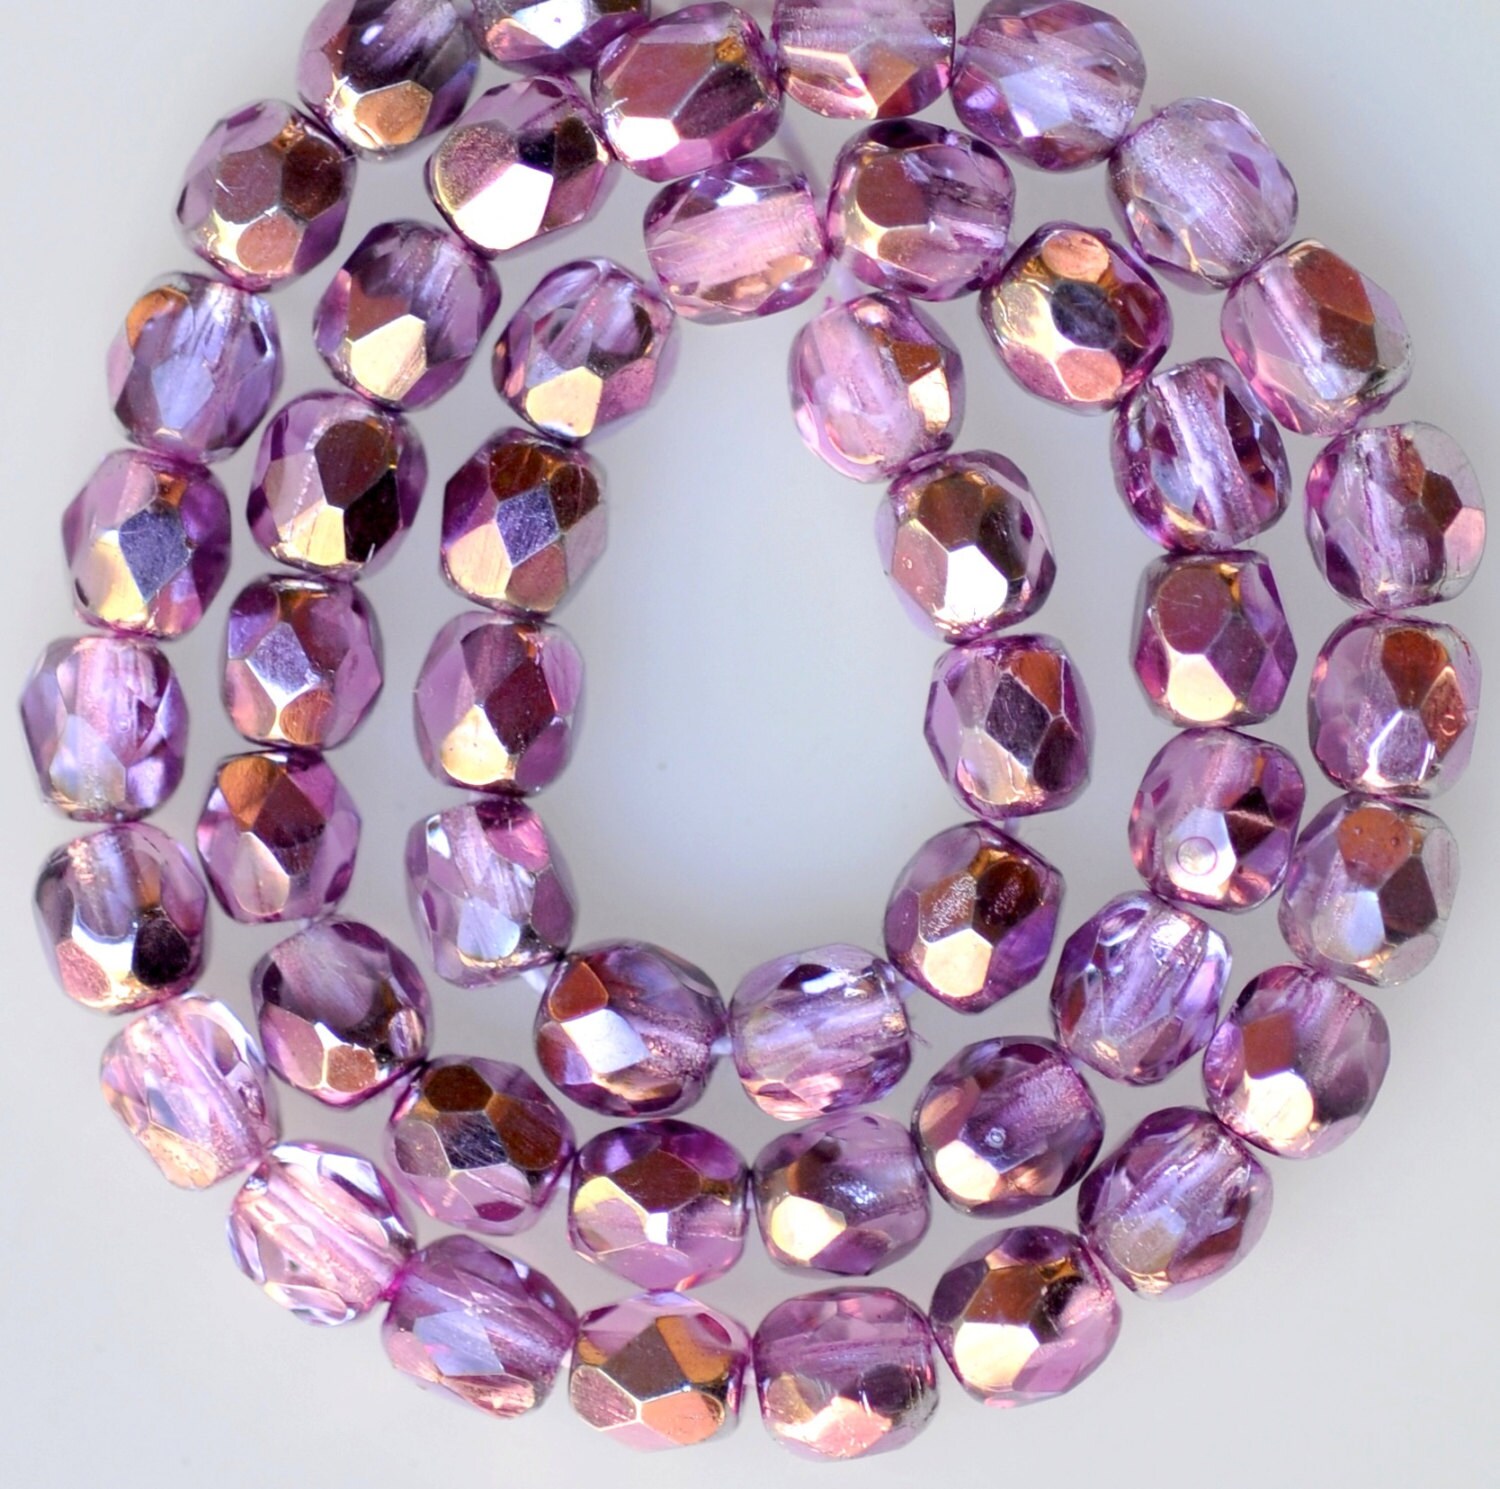 600 pcs 3mm Fire Polished Faceted Glass Beads, Crystal Copper Rainbow,  Shiny Scara Beads for Jewelry Making - Get Inspired with Czech Faceted Beads